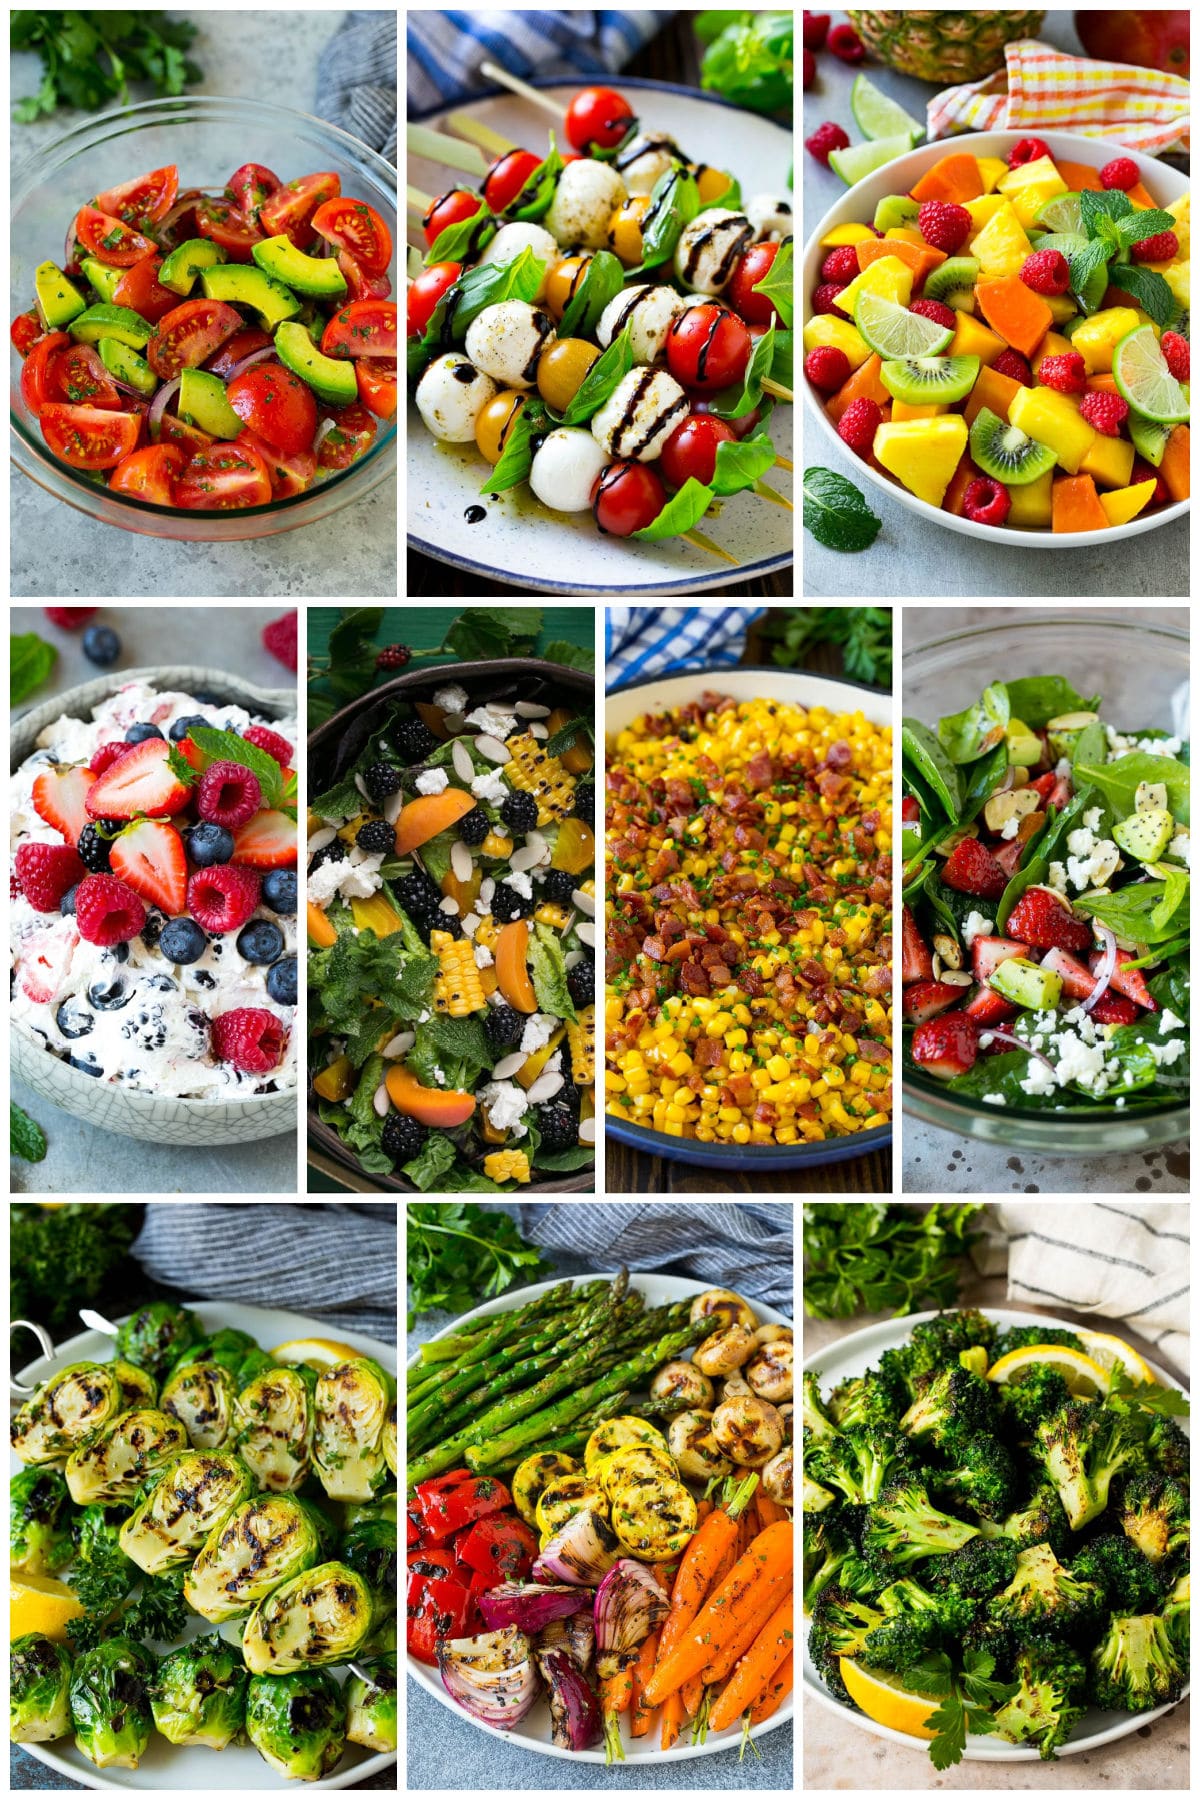 A group of side dishes perfect for summer dinners like caprese skewers, strawberry spinach salad and grilled vegetables.